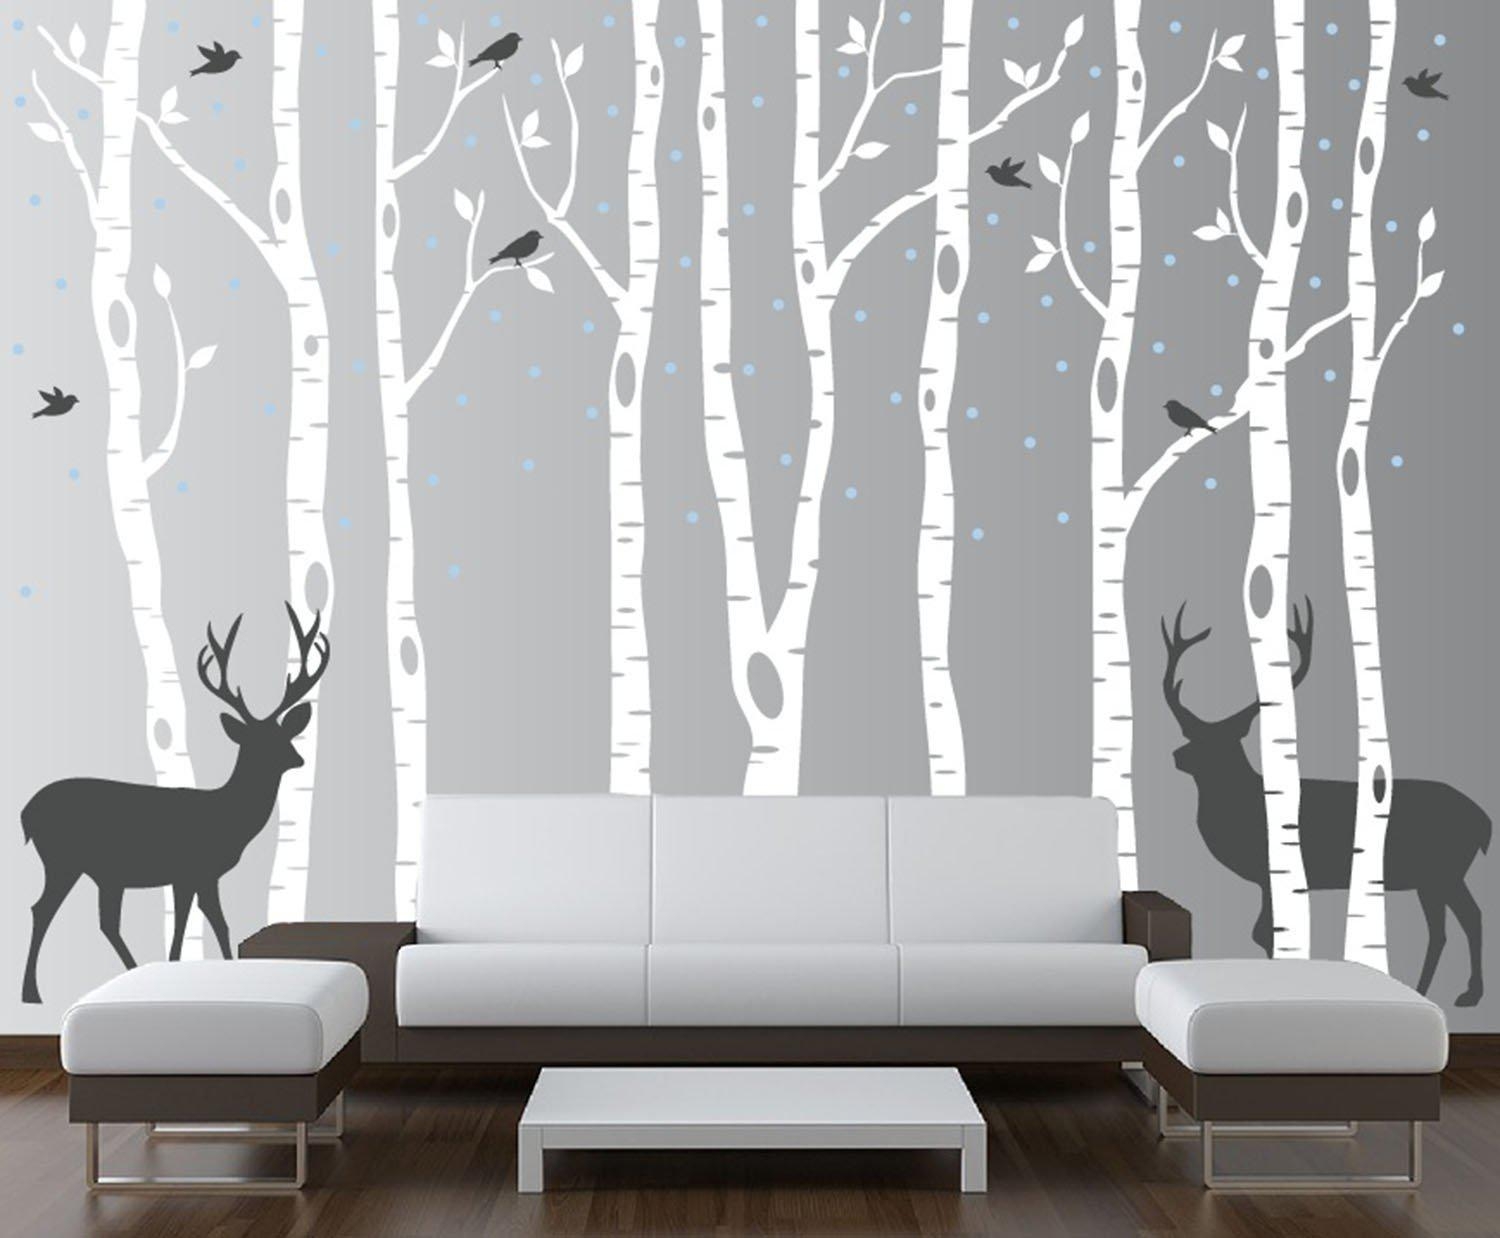 Birch tree wall decal forest with snow